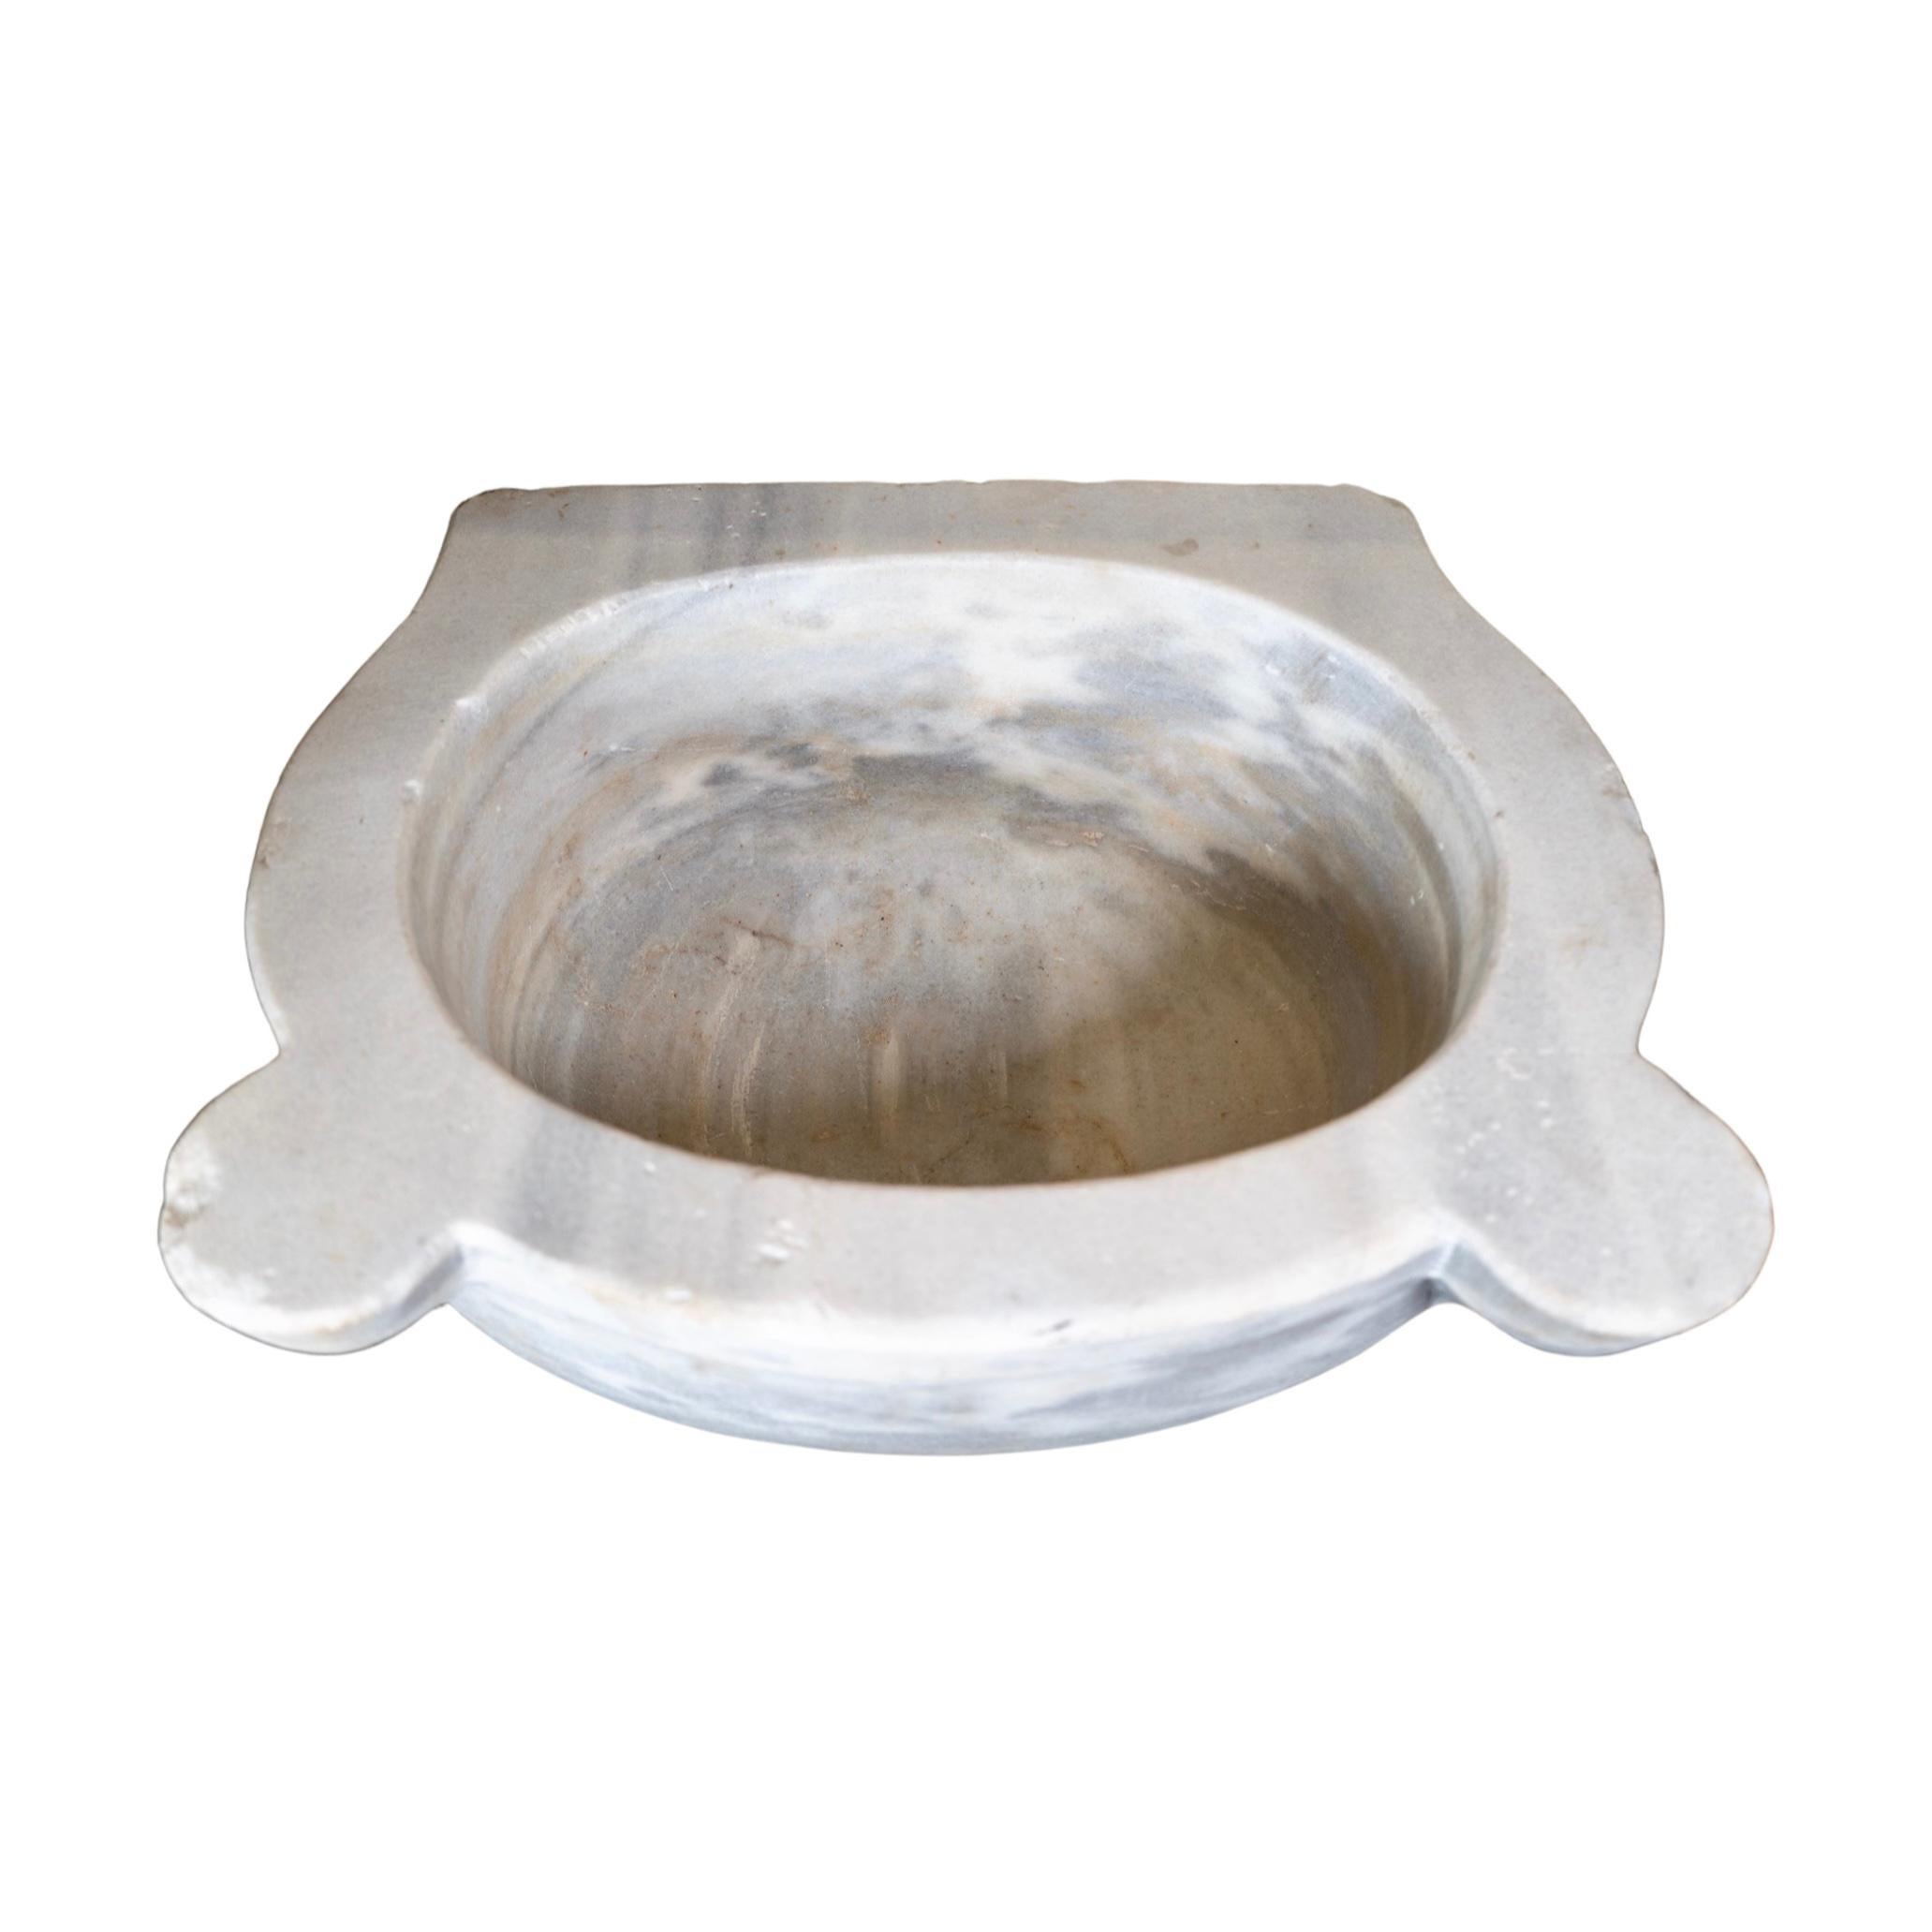 This captivating French white marble sink was hand crafted from premium White Marble from France in the 1800s. Its everlasting magnificence and sturdiness render it a remarkable focus for any restroom.